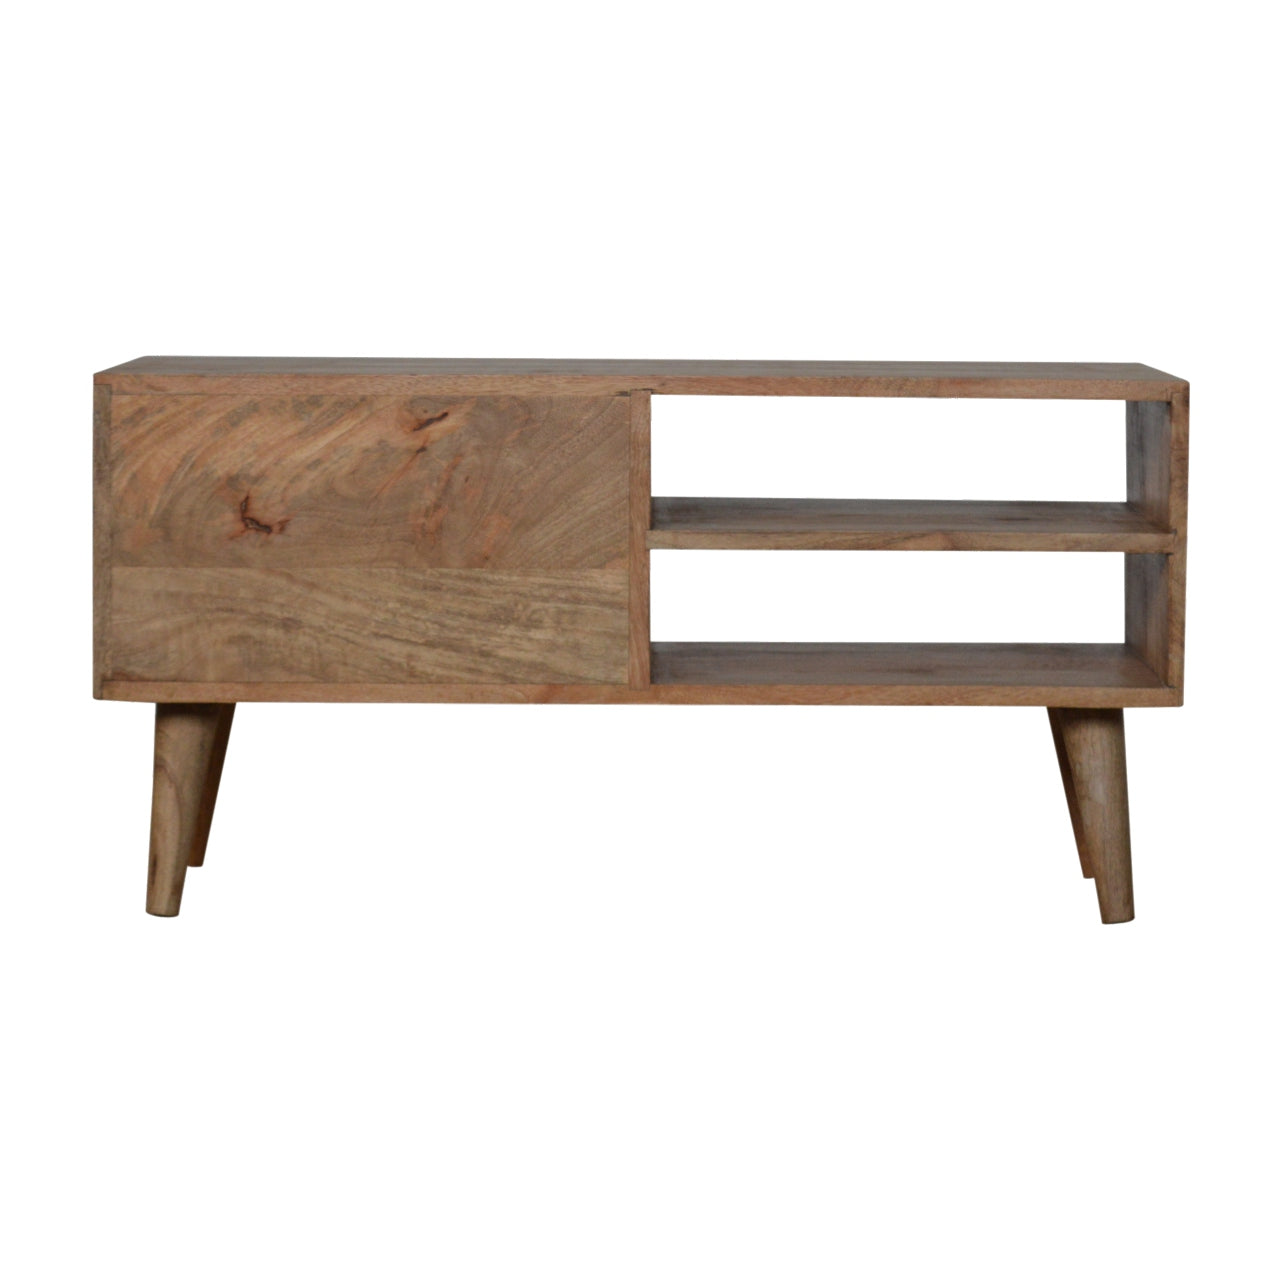 Woven Rattan Solid Wood TV Stand In Oak Finish